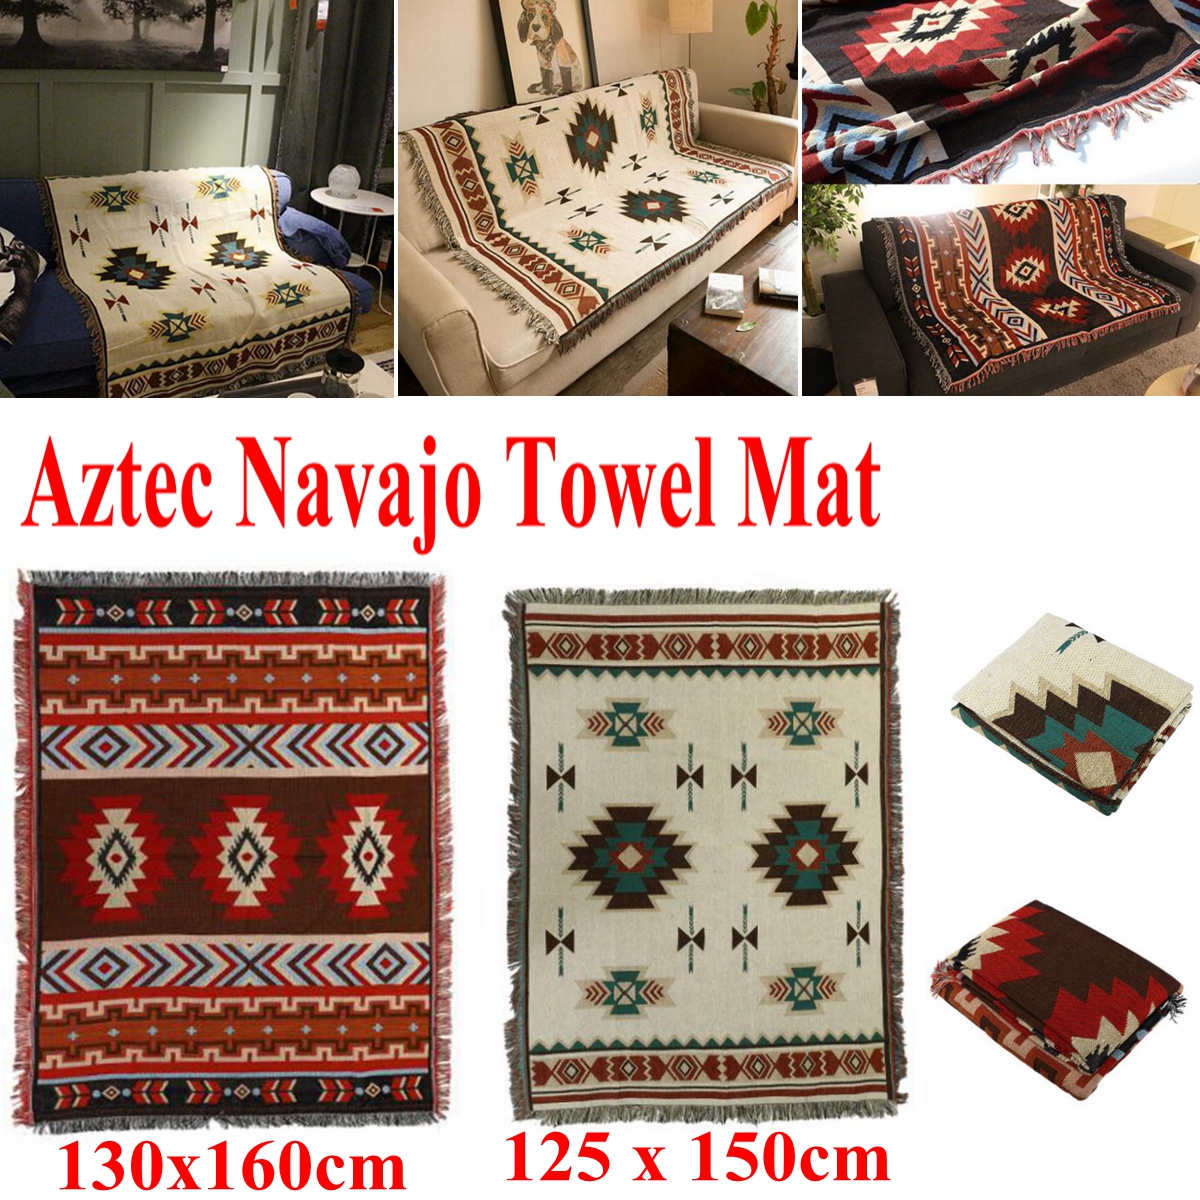 Home-Decoration-Aztec-Navajo-Towel-Mat-Throw-Wall-Hanging-Cotton-Rugs-Geometry-Woven-130160cm-1241567-1